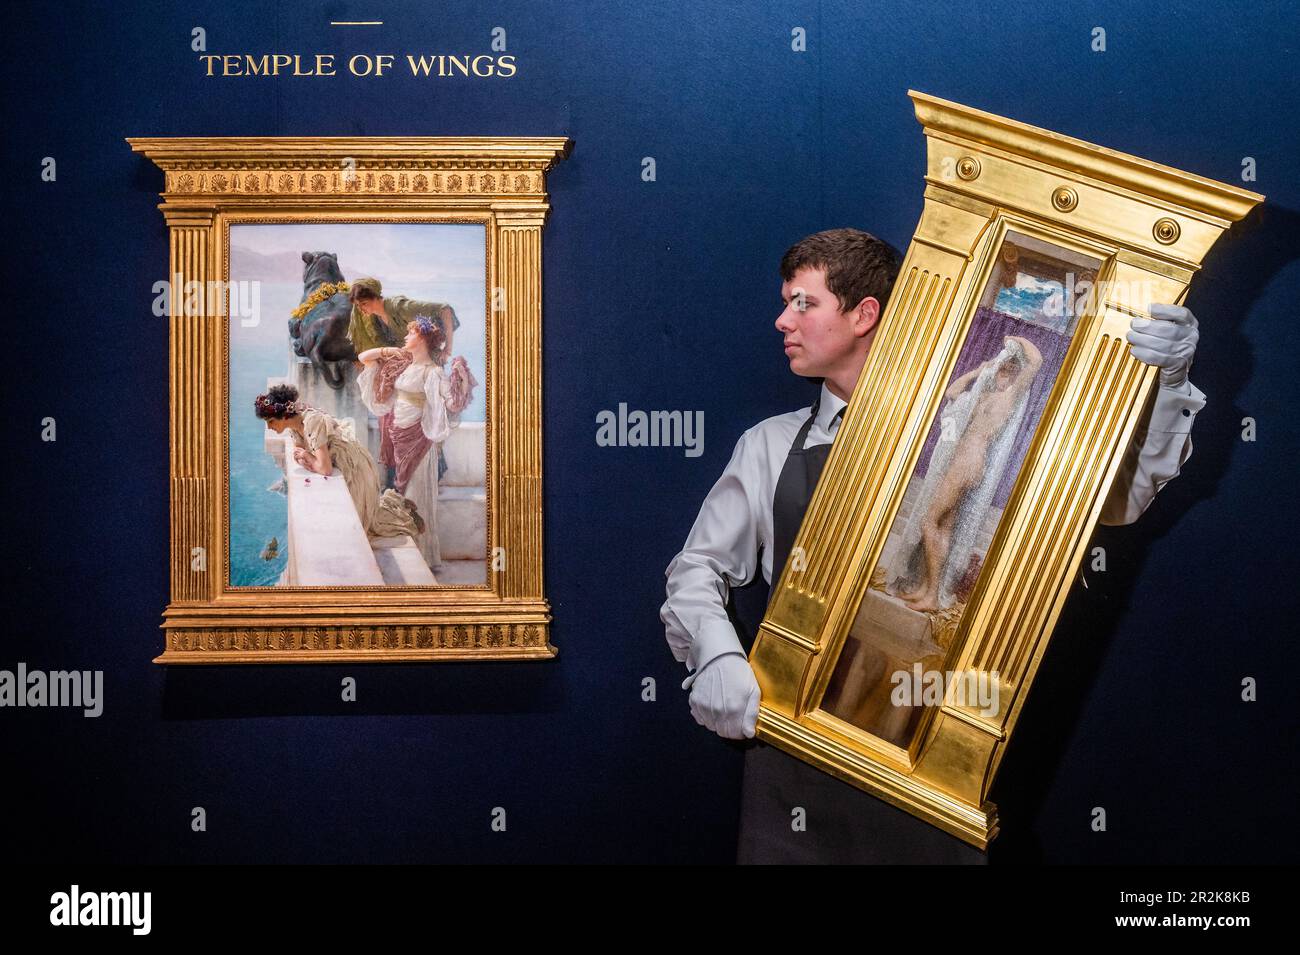 London, UK. 19 May 2023. Sir Lawrence Alma-Tadema, A Coign of Vantage, oil on panel, Estimate $2,500,000-3,500,000 with Frederic, Lord Leighton, The Bath of Psyche, oil on canvas Painted circa 1887, Estimate $300,000-500,000 - The second installment of the Ann & Gordon Getty Collection: Temple of Wings sale at Christies. Following the October 2022 sale in June this presents the contents of the Gettys' historic, turn of the century, Berkeley property: Temple of Wings. The Collection will be sold over one live auction in New York - taking place on June 14, and two online sales ending on June 15 Stock Photo